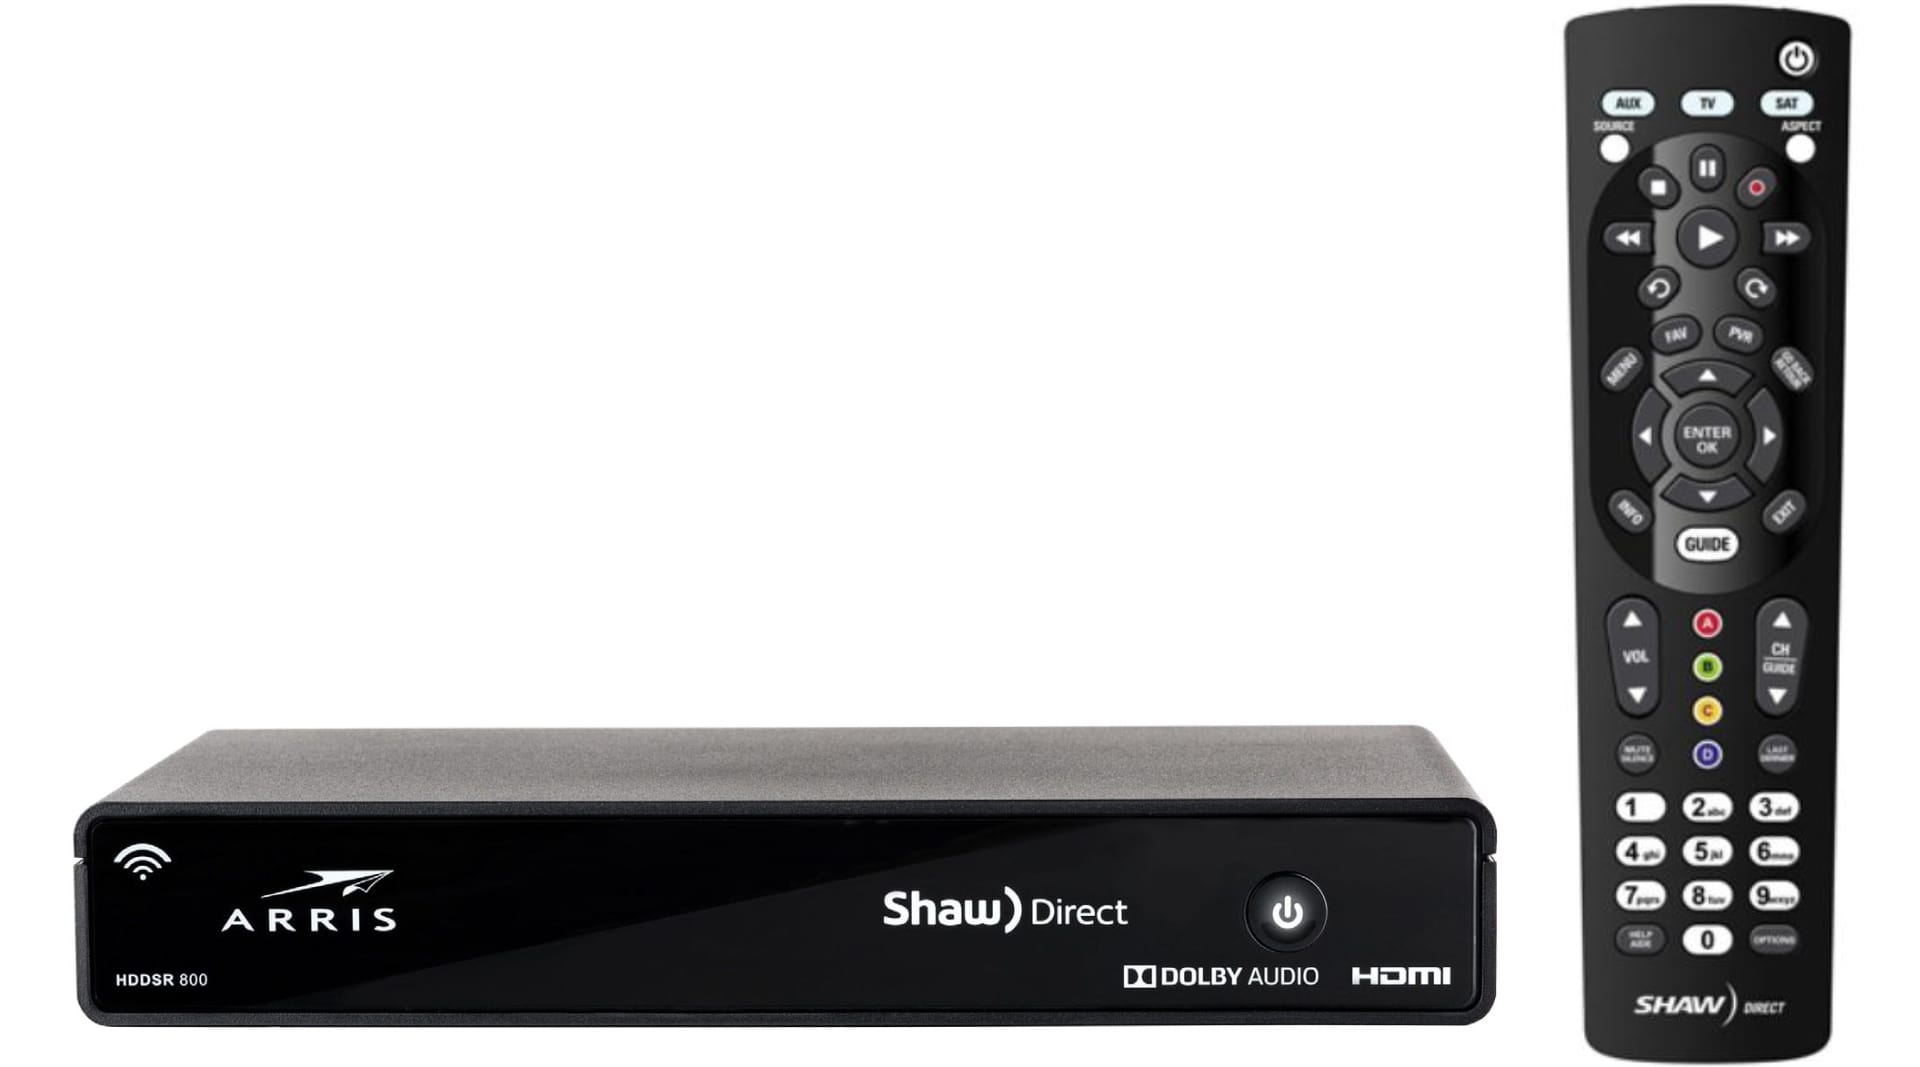 TV screen with Shaw Direct cable TV box and remote